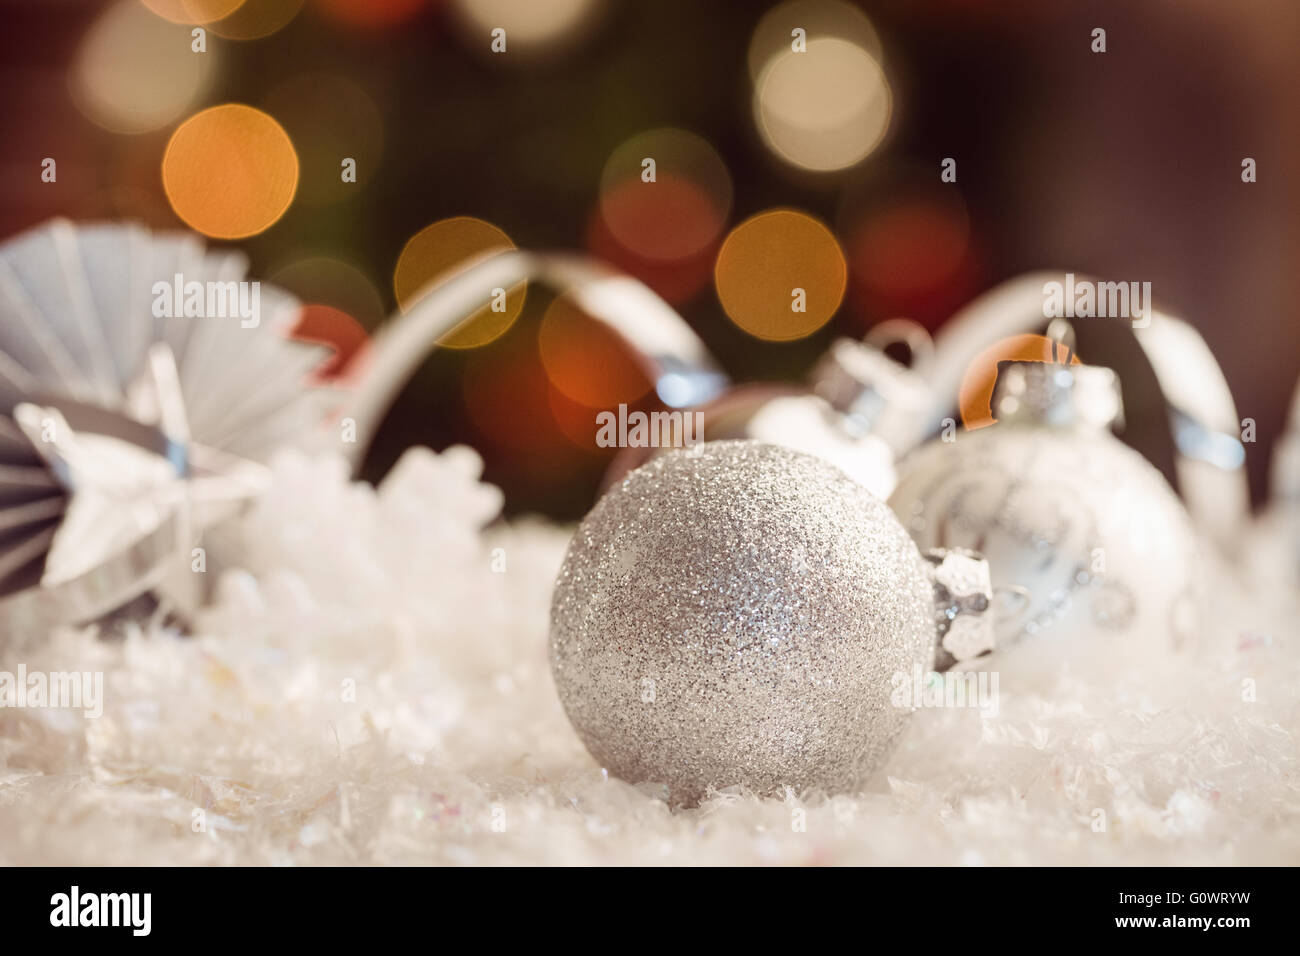 extreme close up view of white baubles Stock Photo